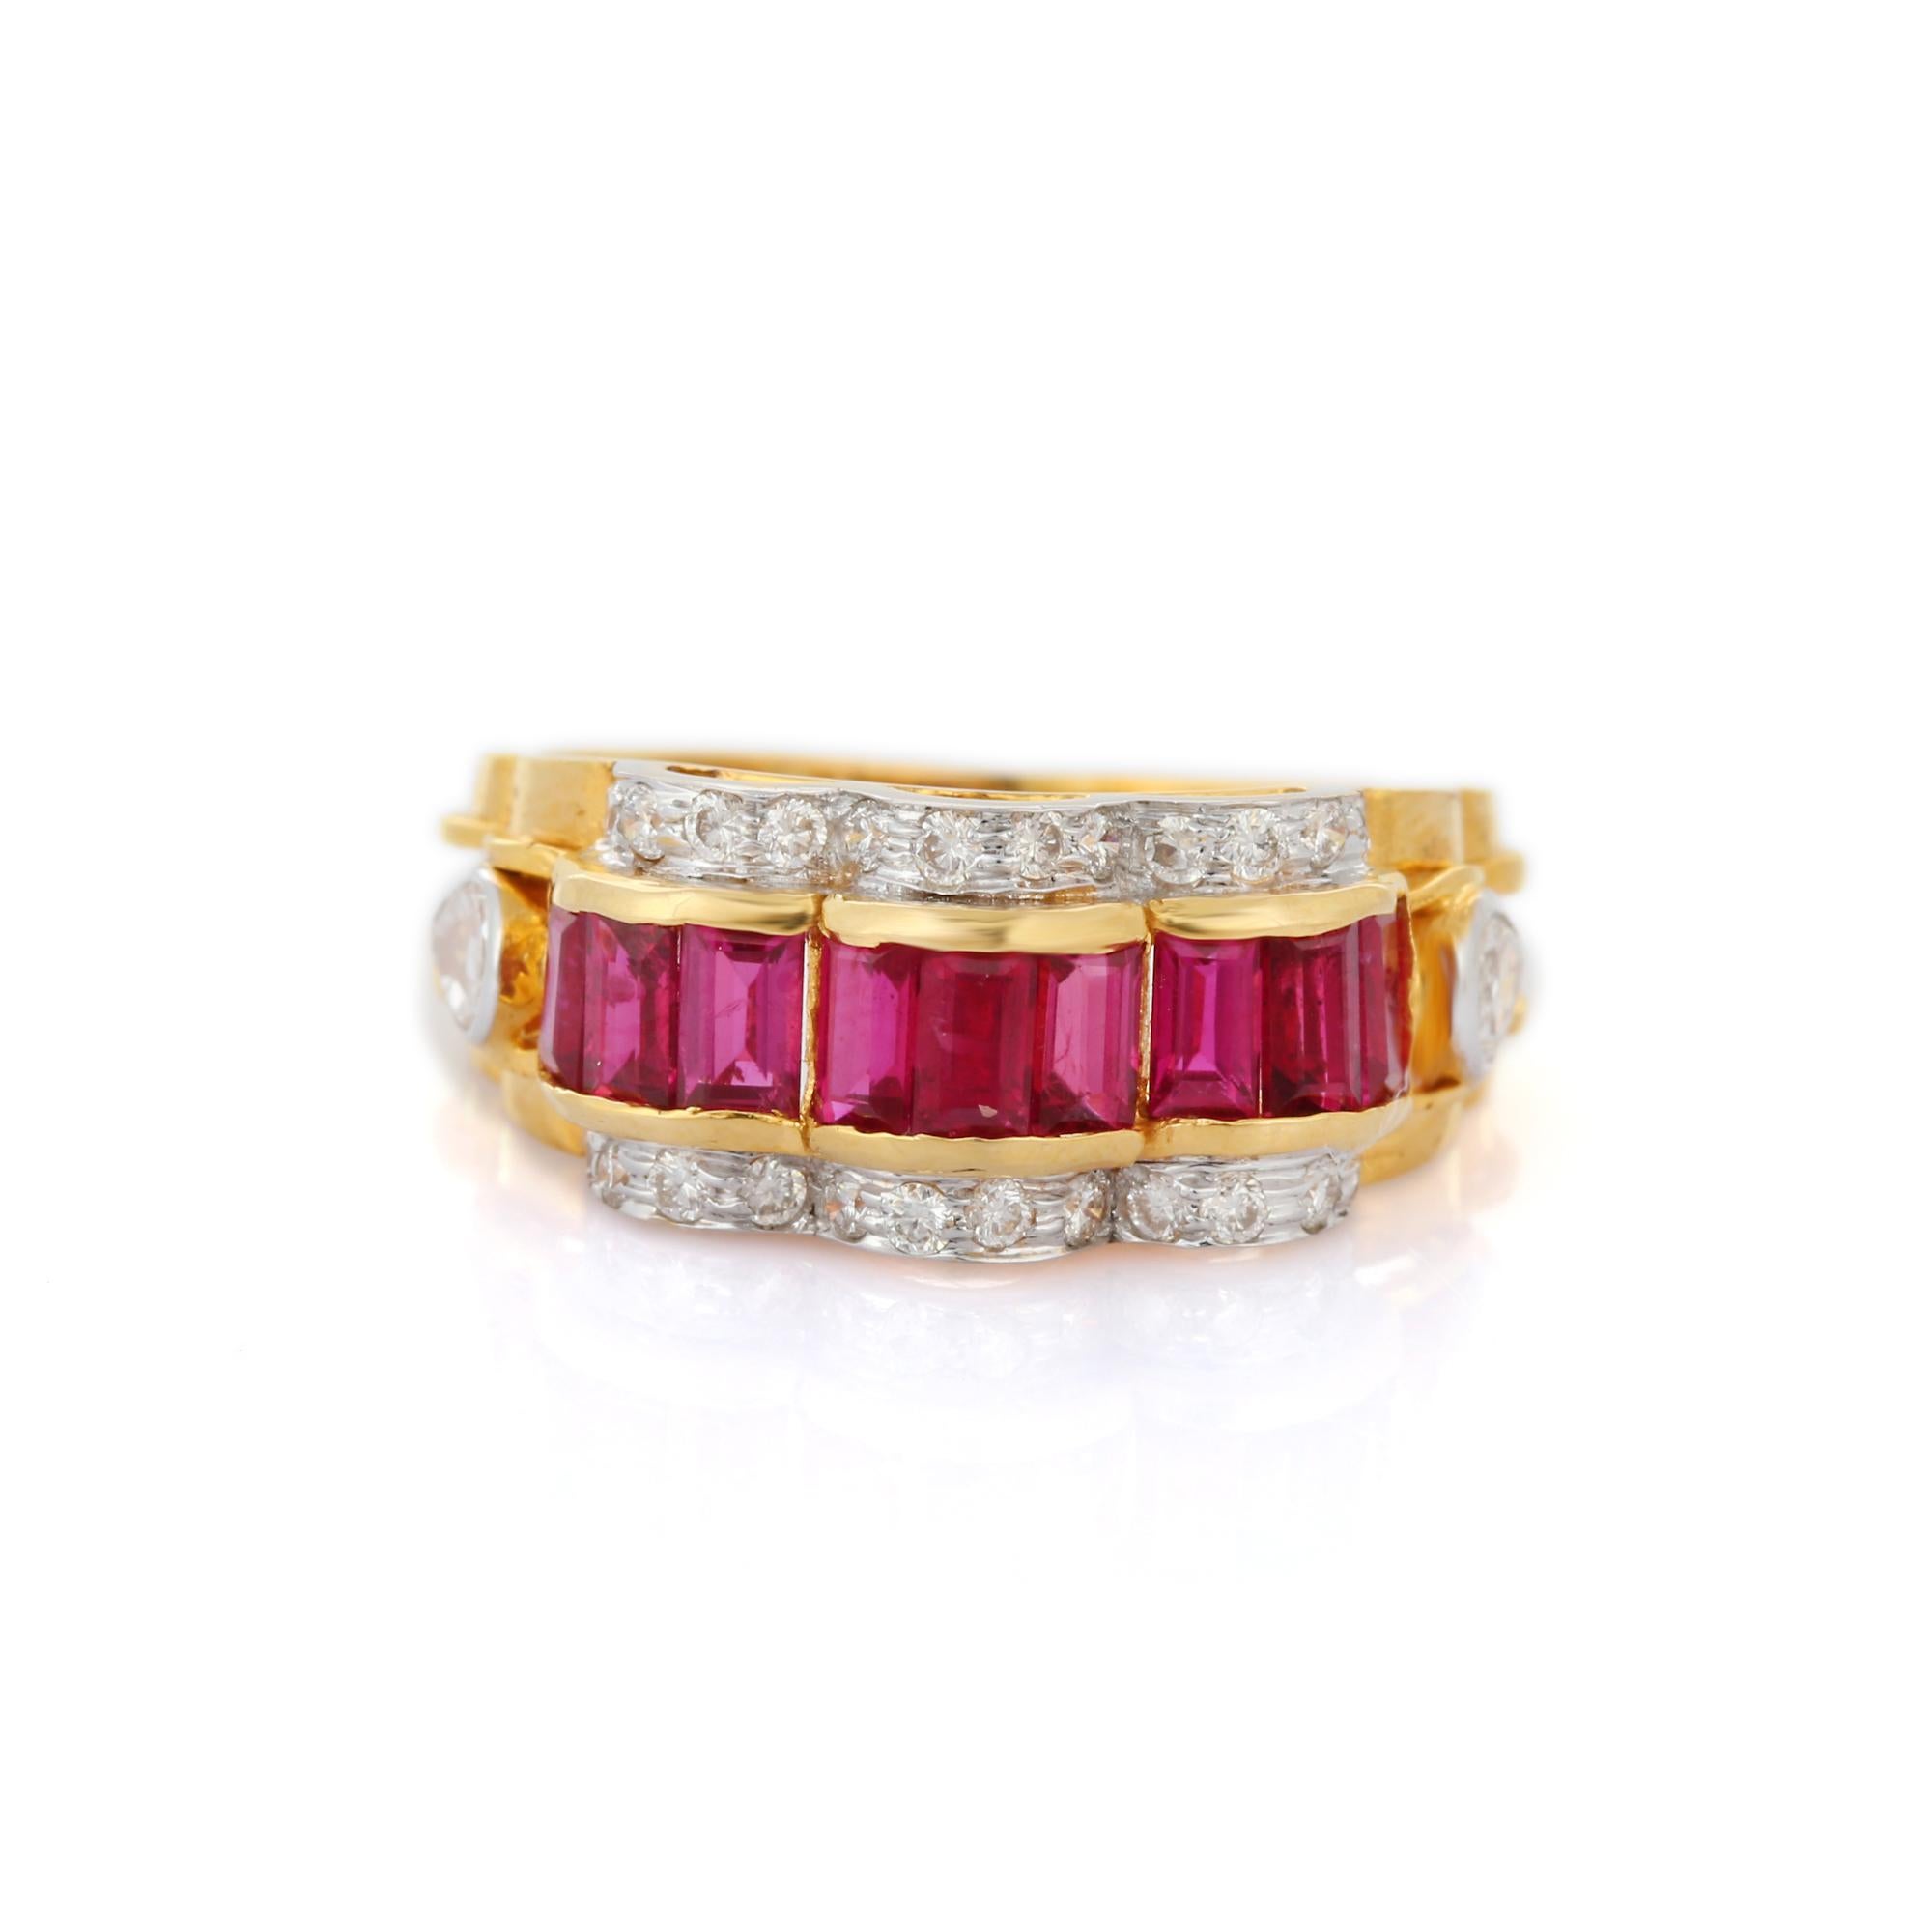 For Sale:  Contemporary 2.7 ct Ruby and Diamond Wedding Ring in 18K Yellow Gold 2